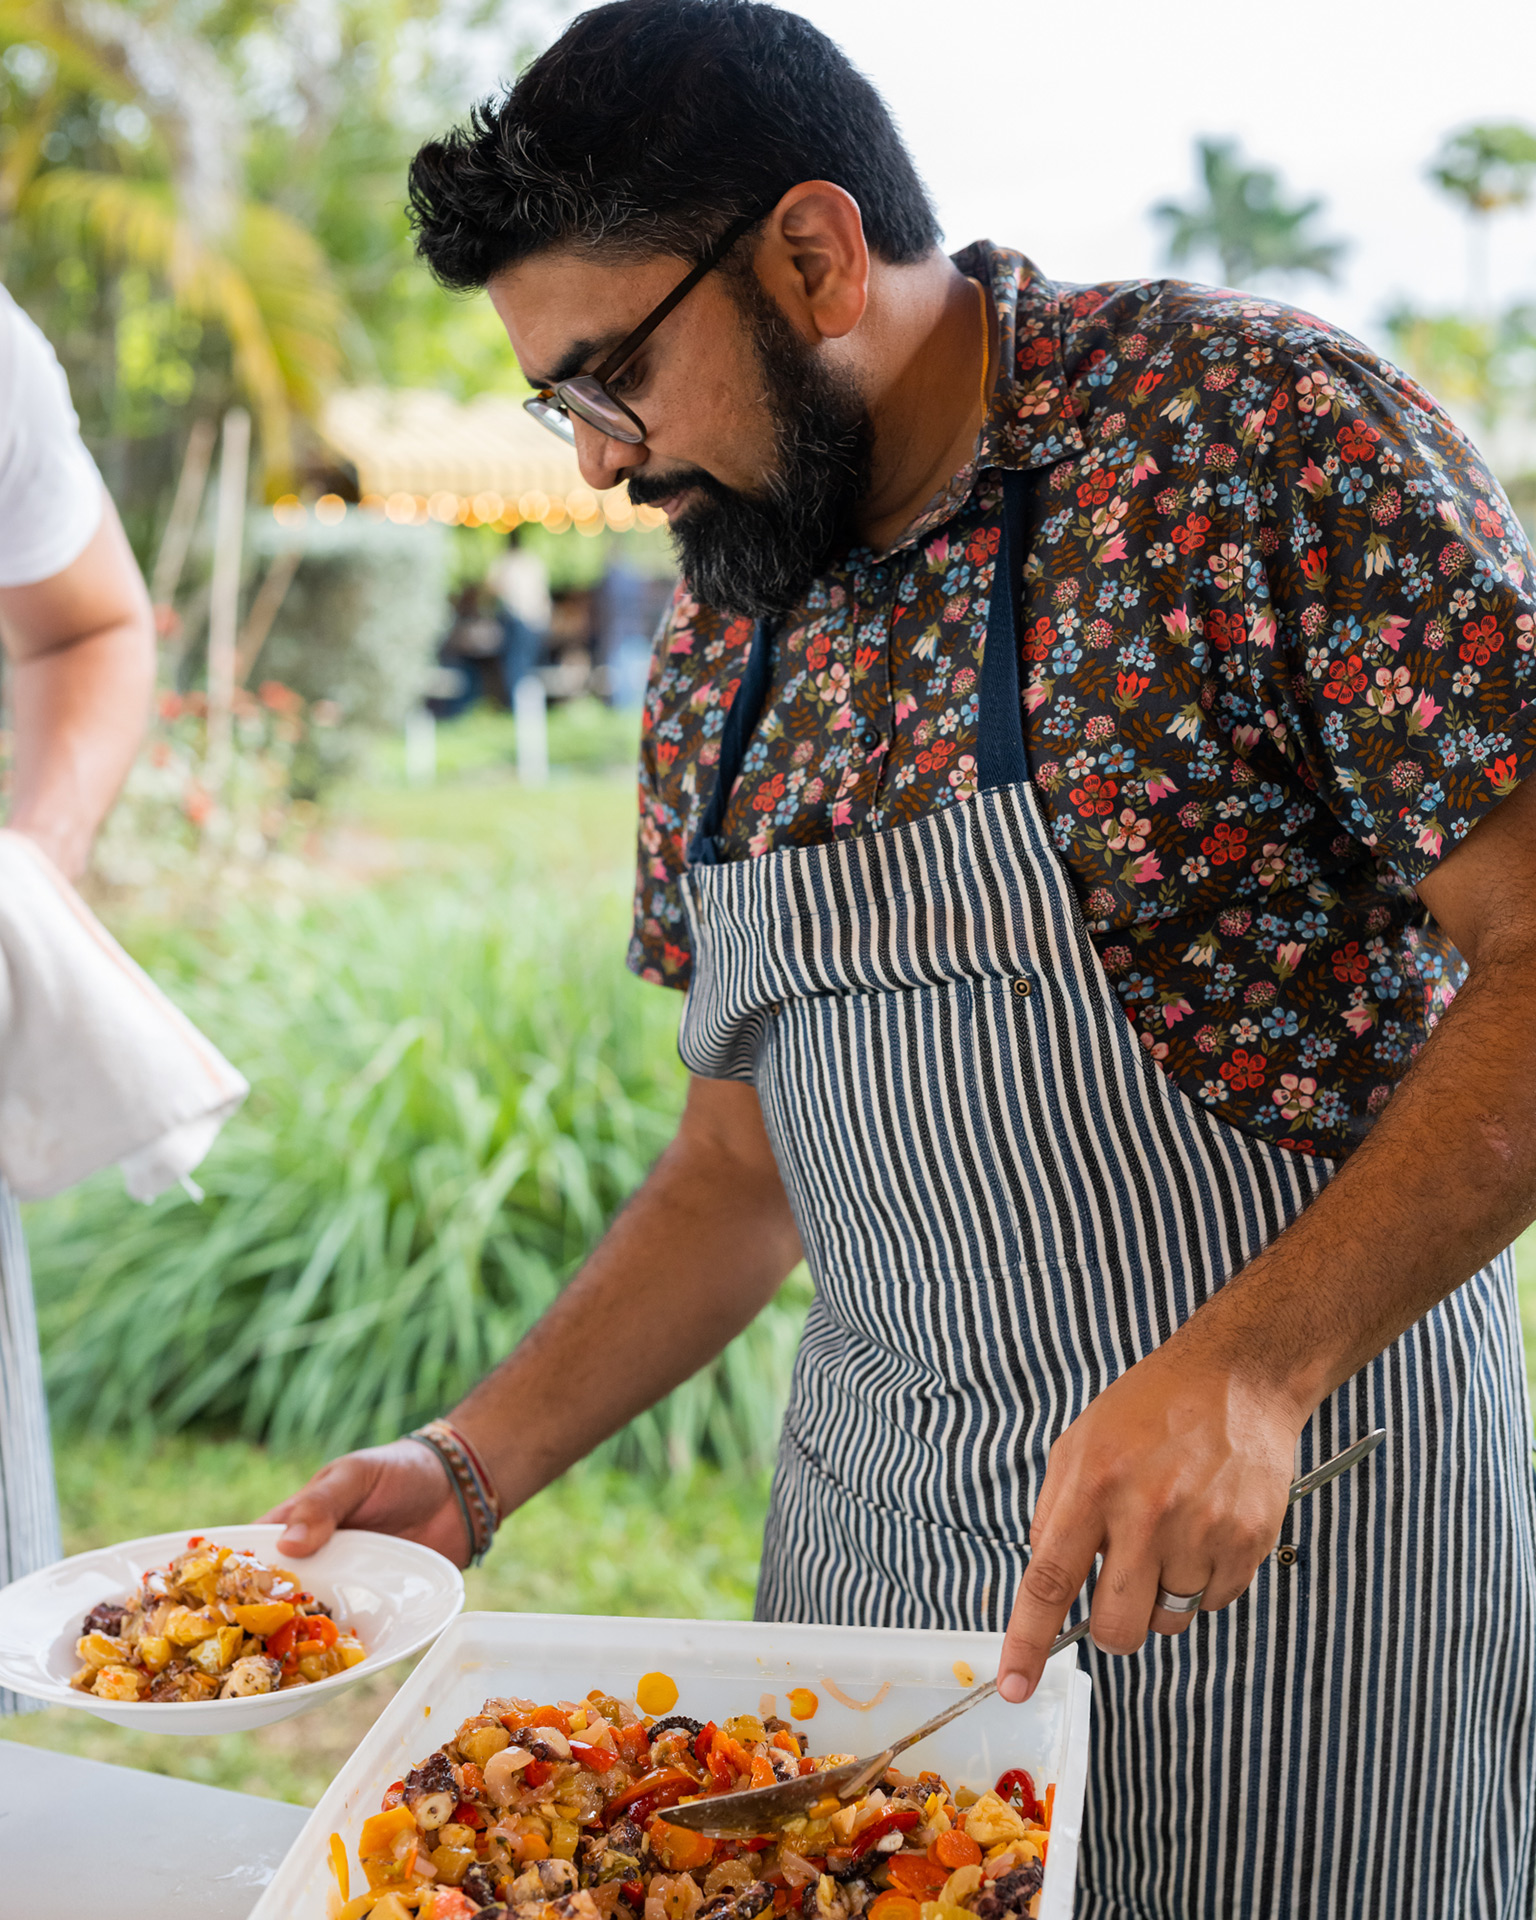 Chef Niven Patel, owner the Miami restaurants Ghee and Orno, cooks at his farm in Homestead, Florida (photograph by Adinayev).